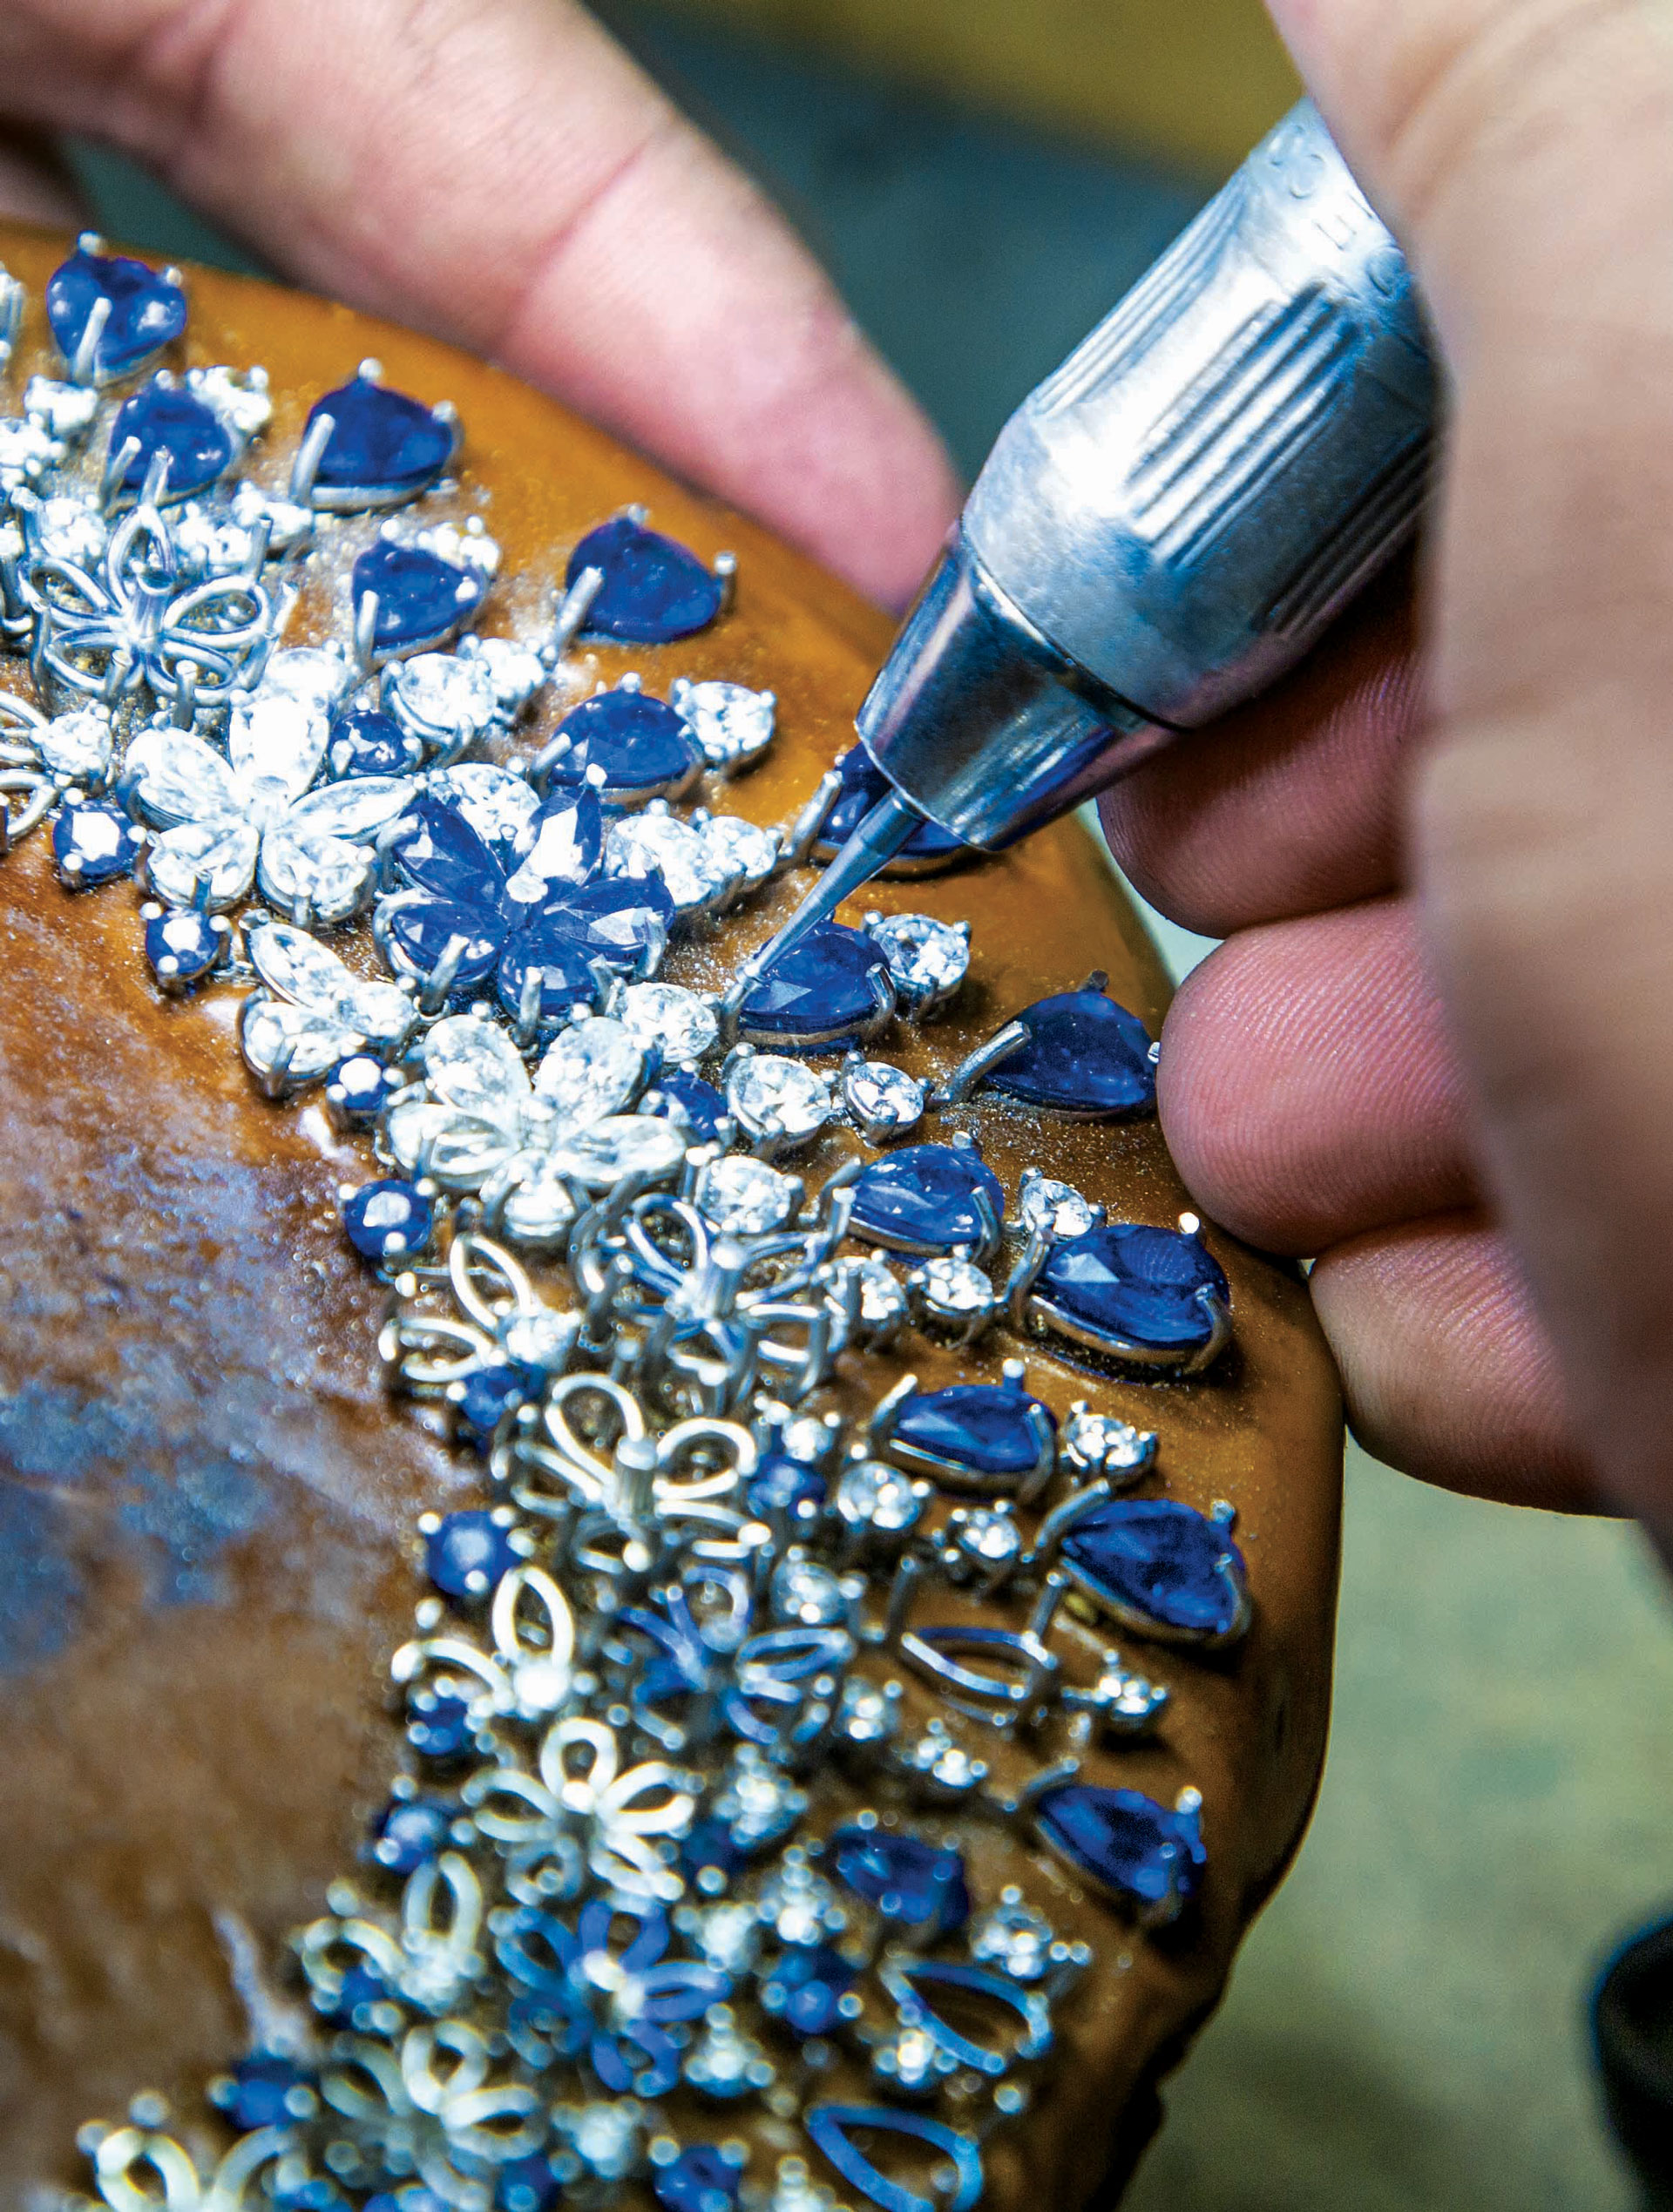 Specialist works on blue and silver diamonds